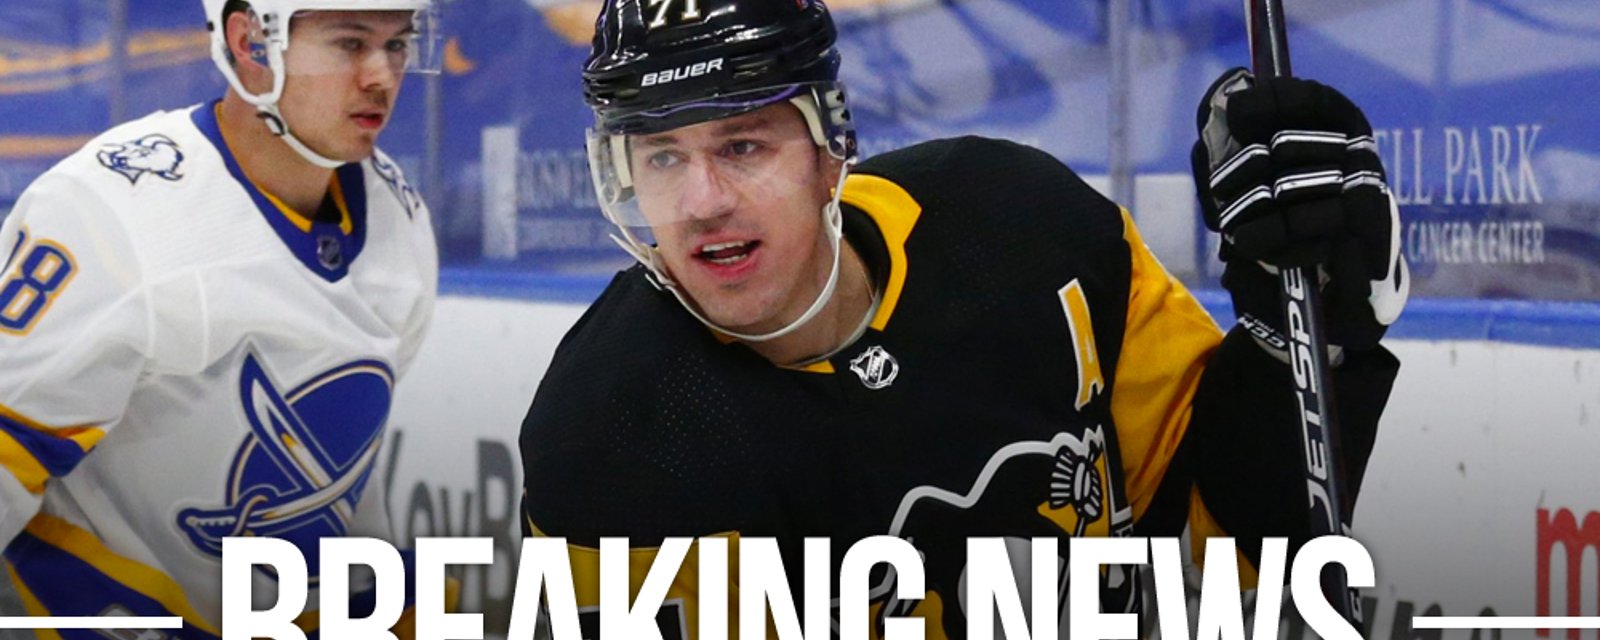 Malkin officially returns after missing 23 games with injury